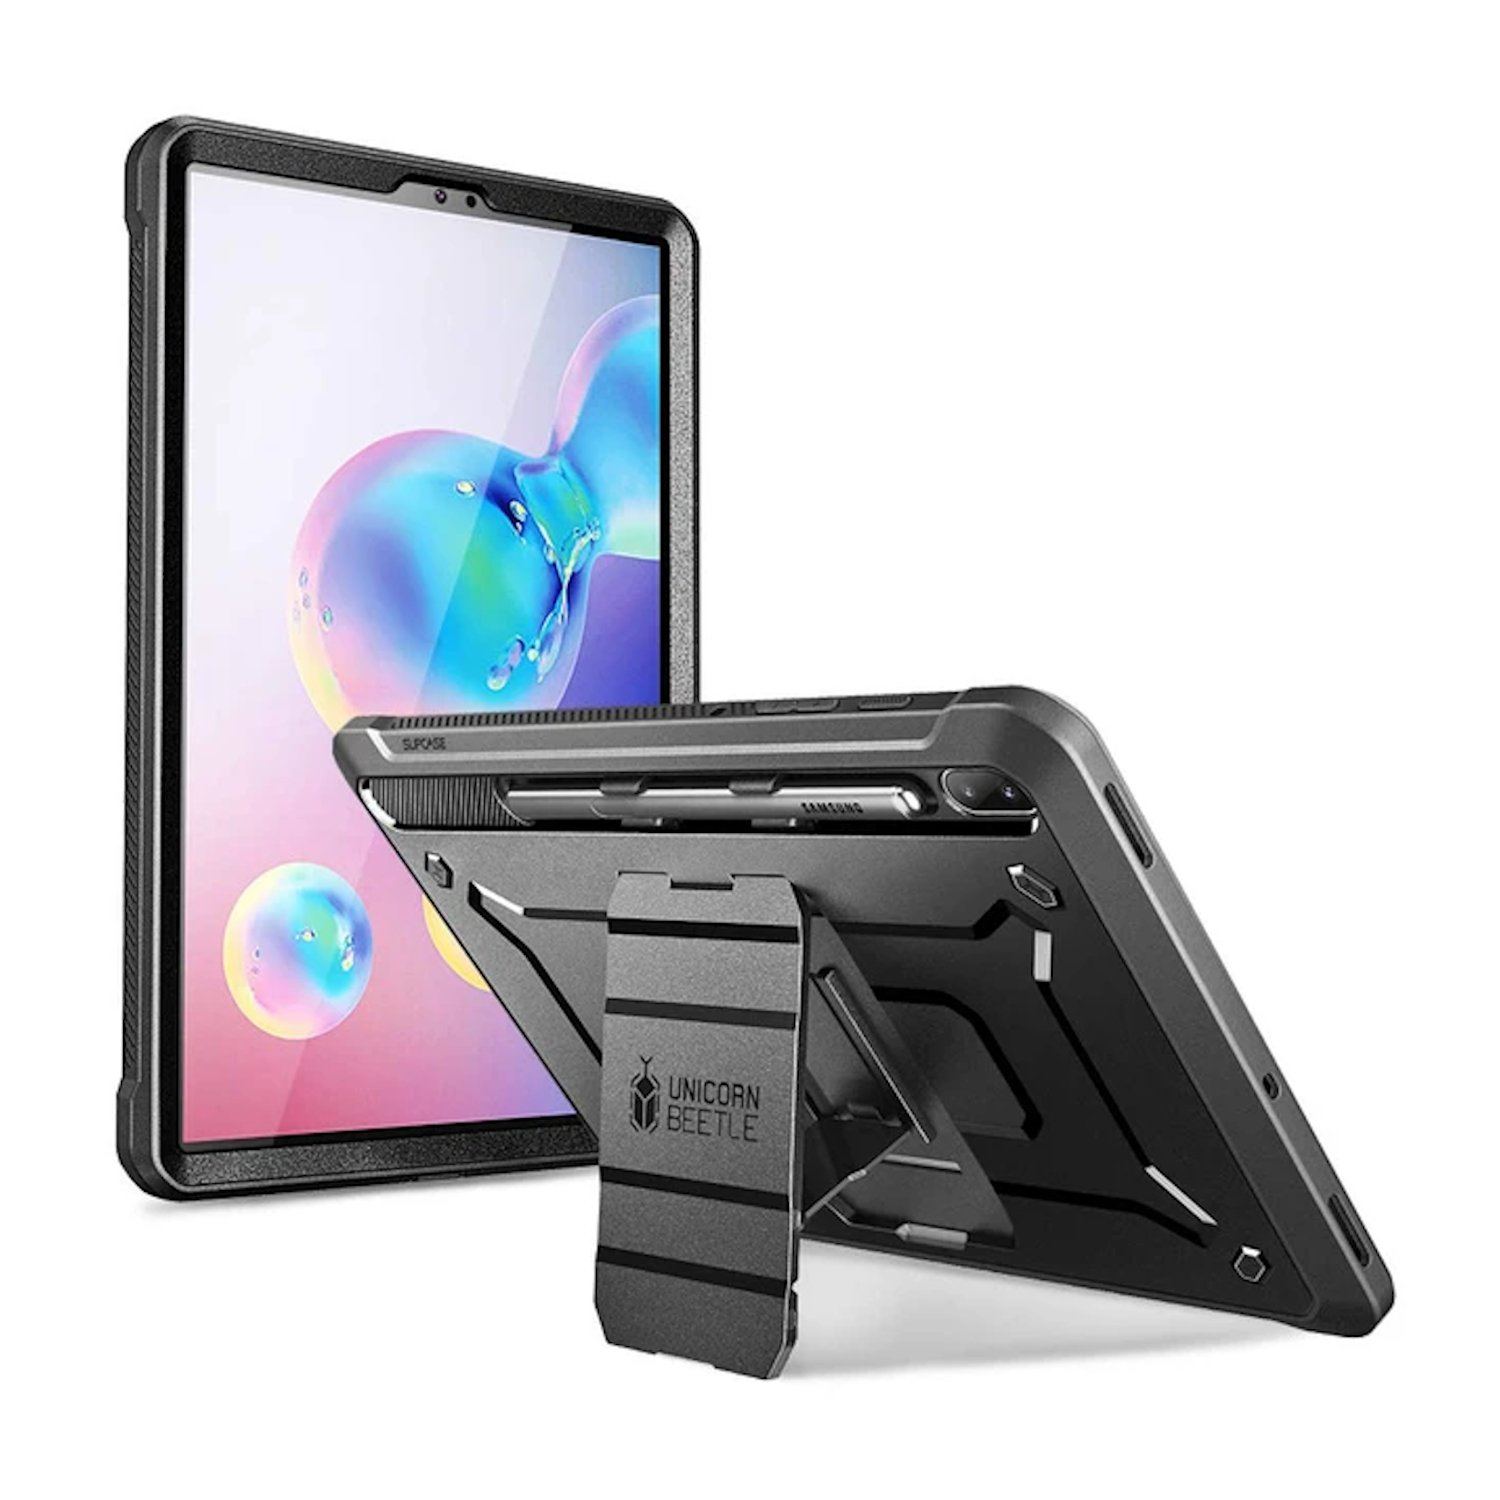 Supcase UB Pro Series Full-Body Rugged Case with Kickstand for Samsung Galaxy Tab S6(2019), Black Tab S6 Case Supcase Black 